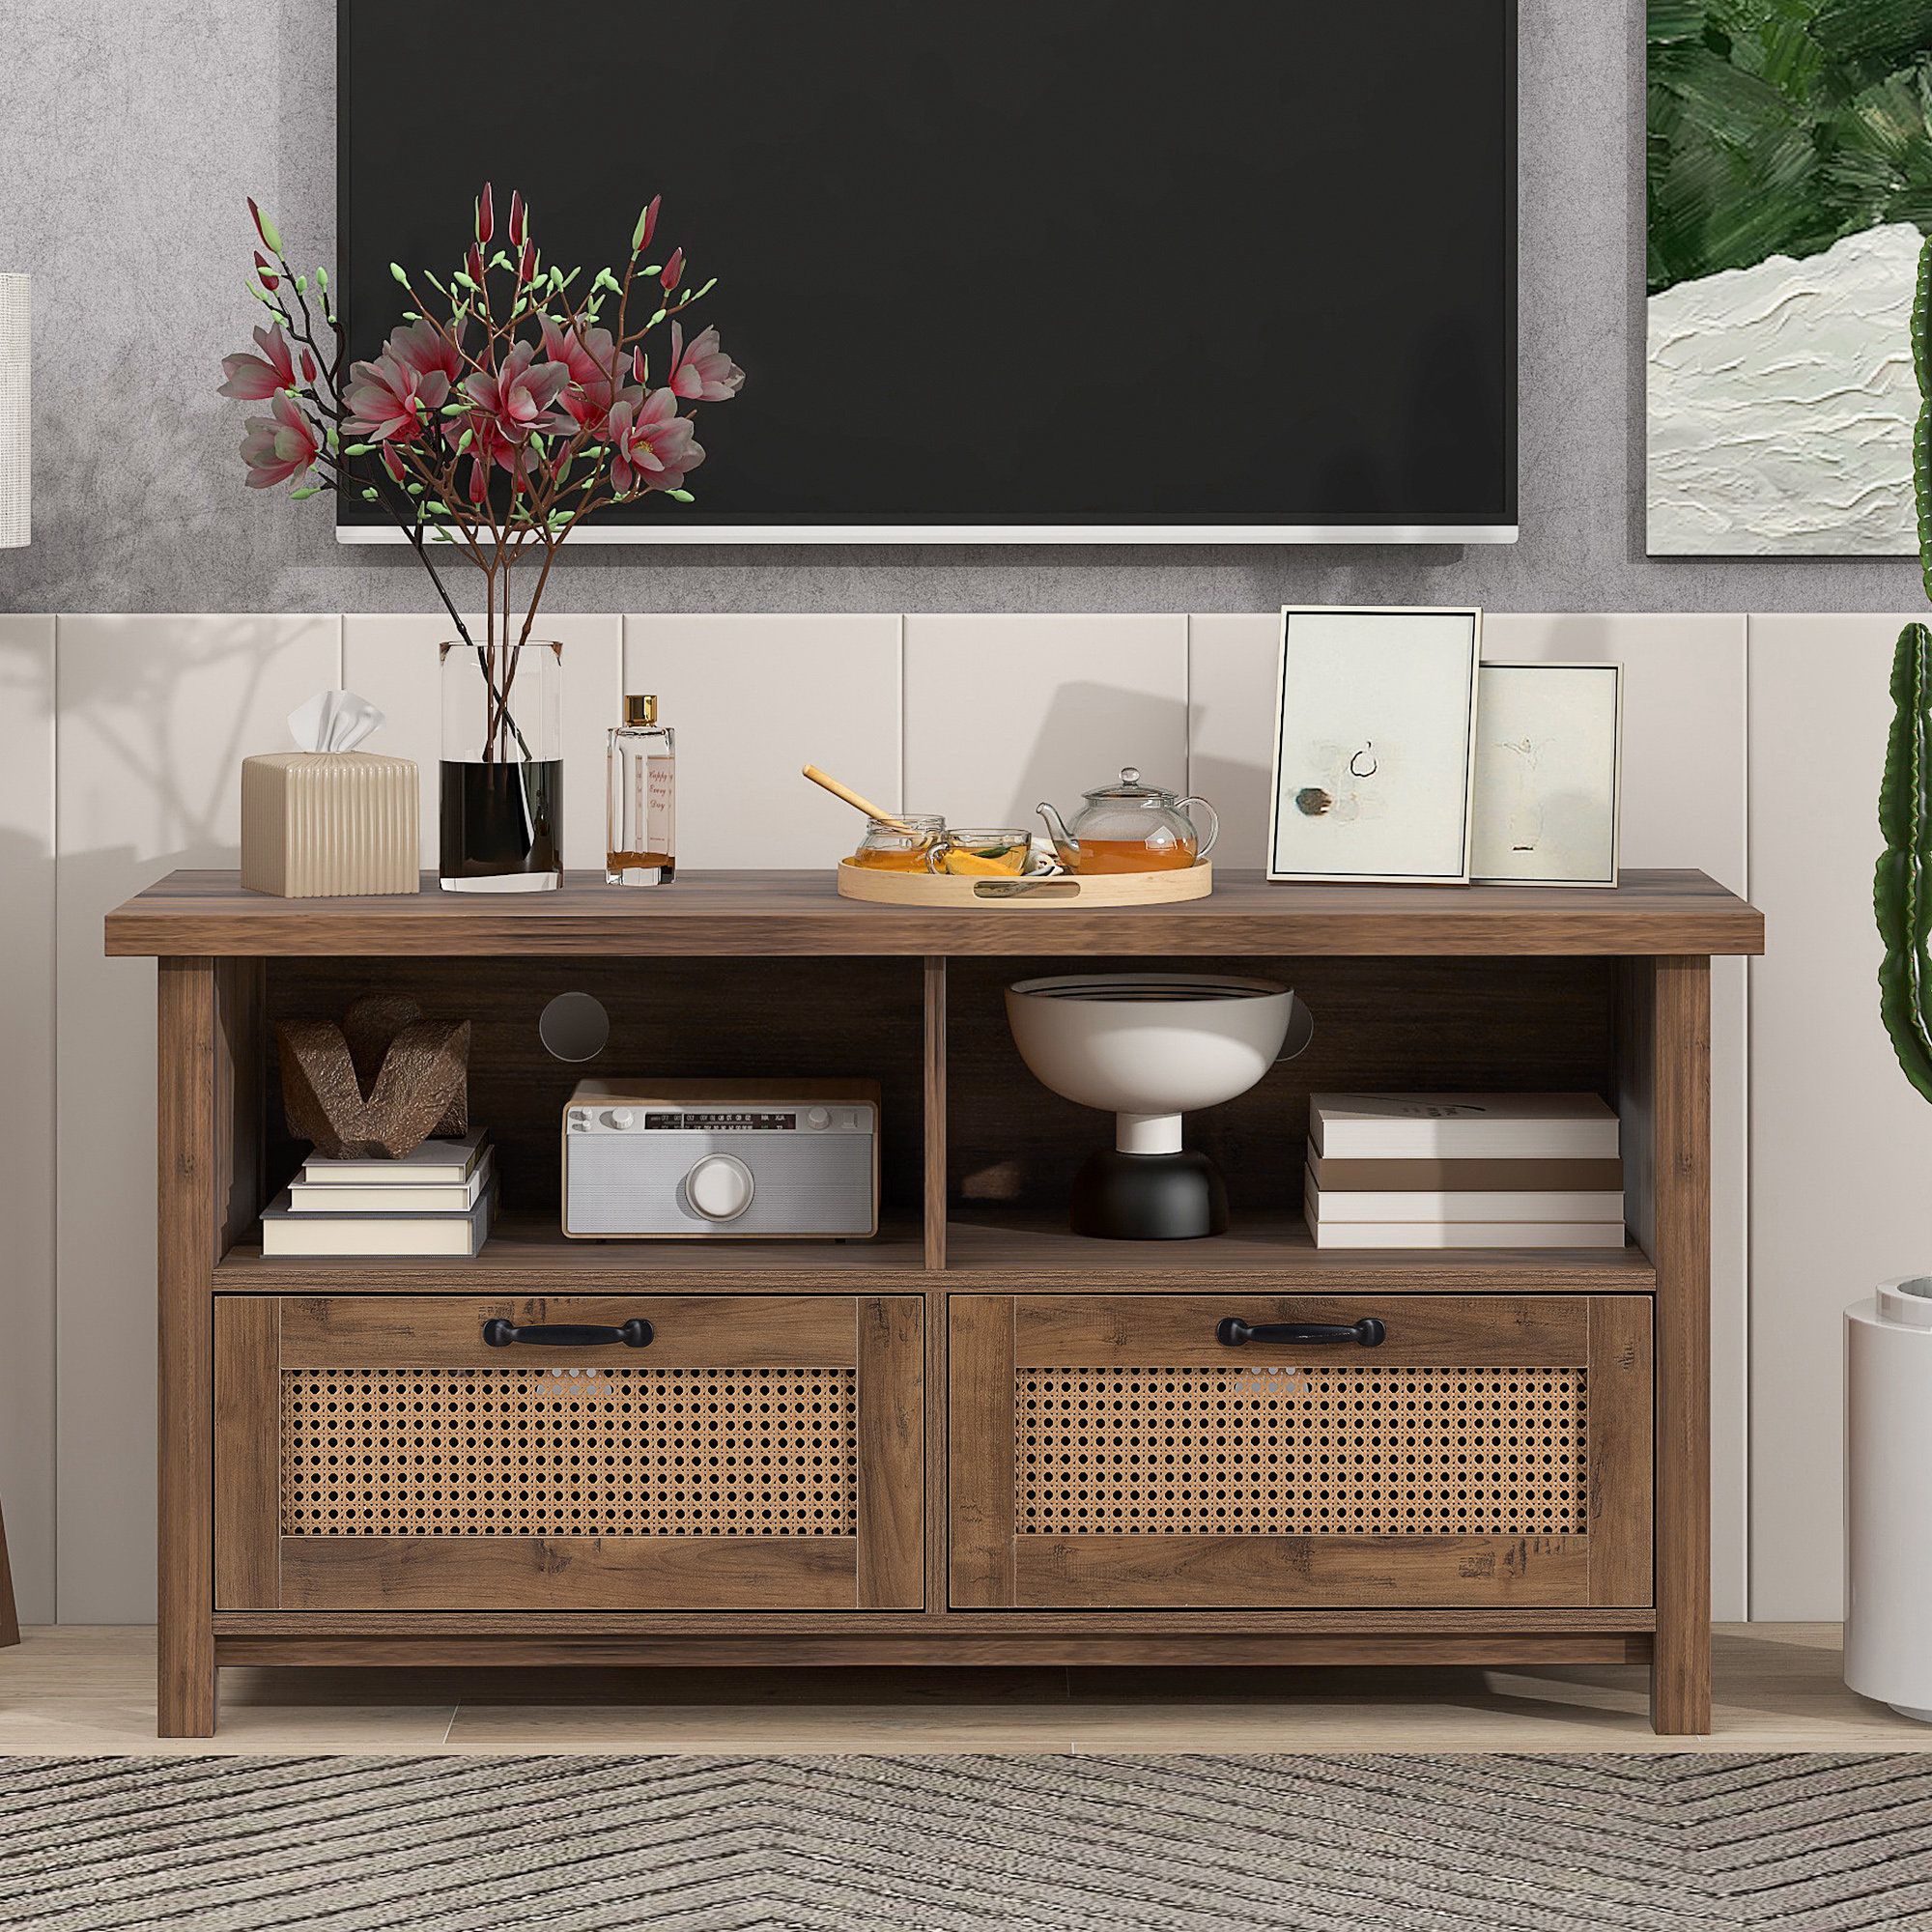 Bay Isle Home Farmhouse Tv Stand For Tvs Up To 55", Modern Cabinet Wood  Accent Buffet Sideboard W/ 2 Rattan Drawer & Reviews | Wayfair Regarding Farmhouse Rattan Tv Stands (View 17 of 20)